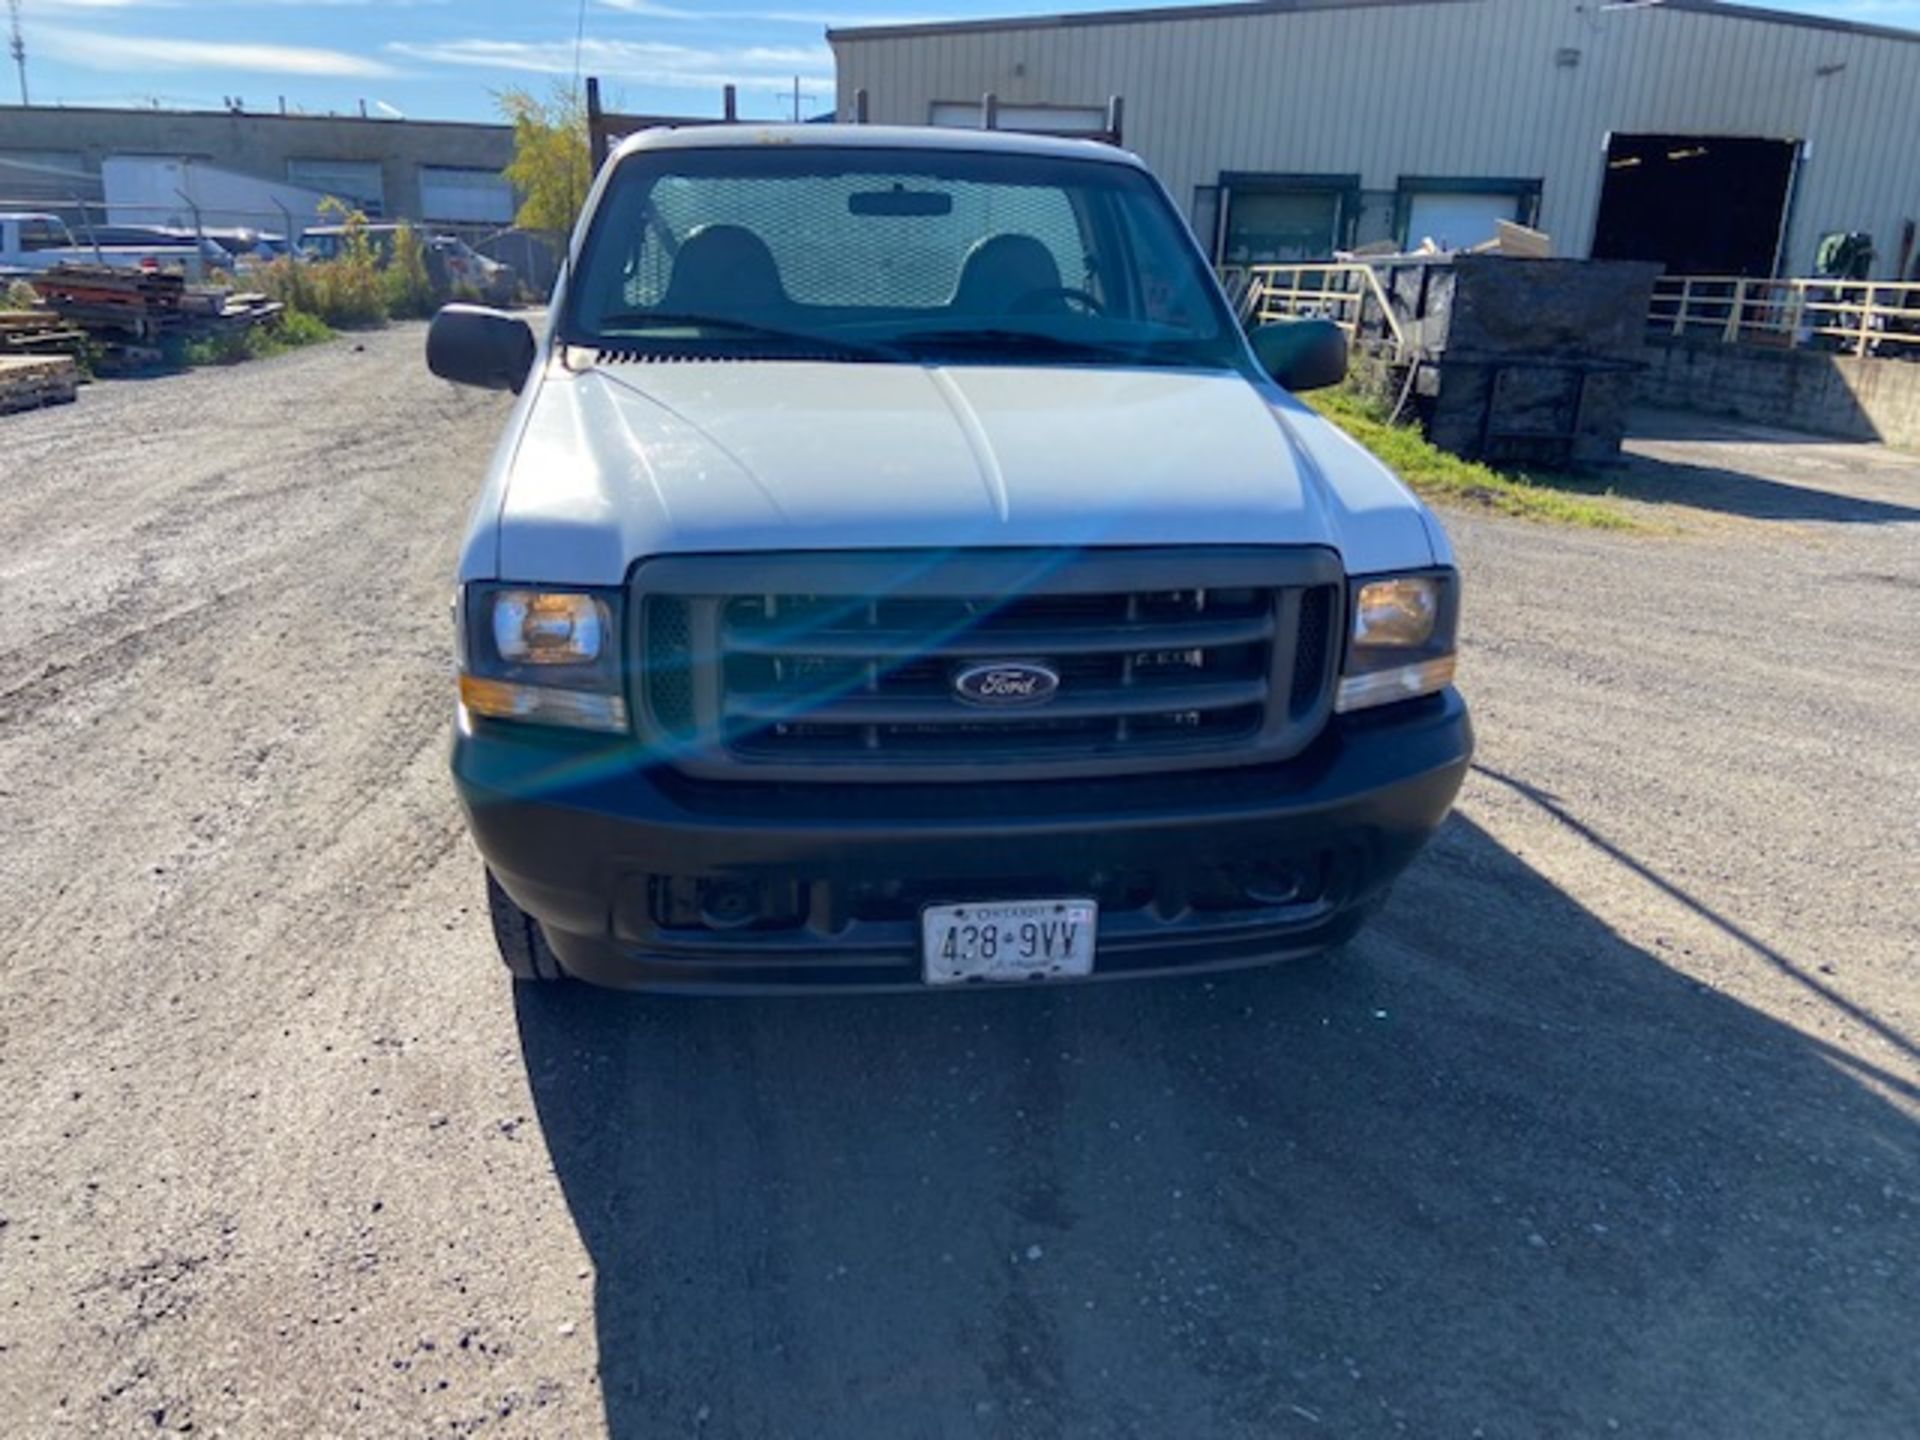 2002 Ford F-350 Pickup Truck with Hydraulic Lift Gate and Racks - NEW 2016 engine - 140,000km - Image 5 of 6